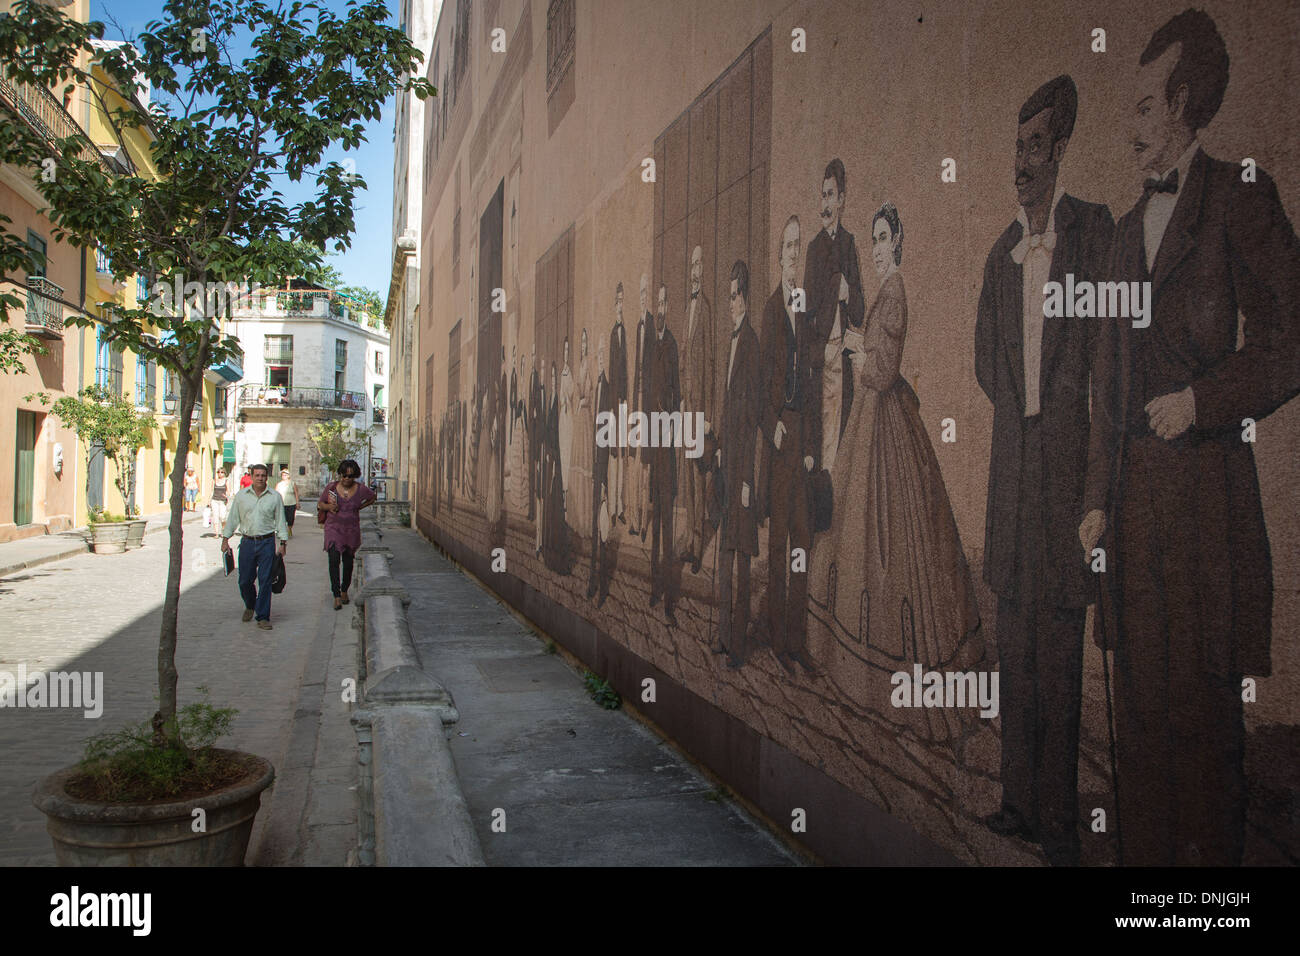 FRESCO ILLUSTRATING SPANISH COLONIALIZATION ON A WALL IN THE CALLE MERCADERES, HAVANA, CUBA, THE CARIBBEAN Stock Photo